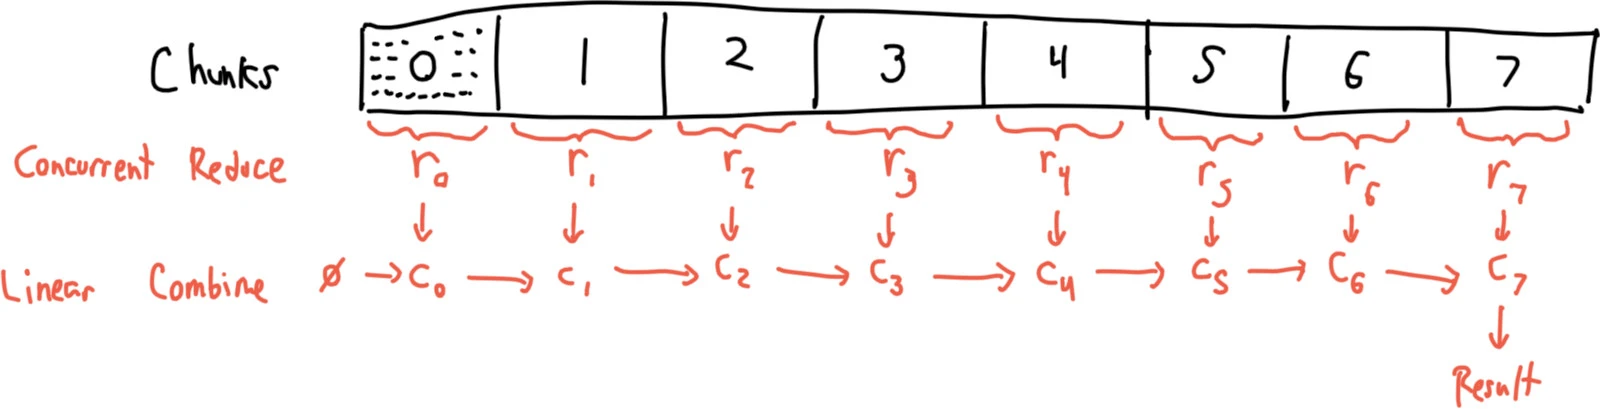 A diagram showing how concurrent folds proceed in independent reductions over each chunk, then combined in a second linear pass.